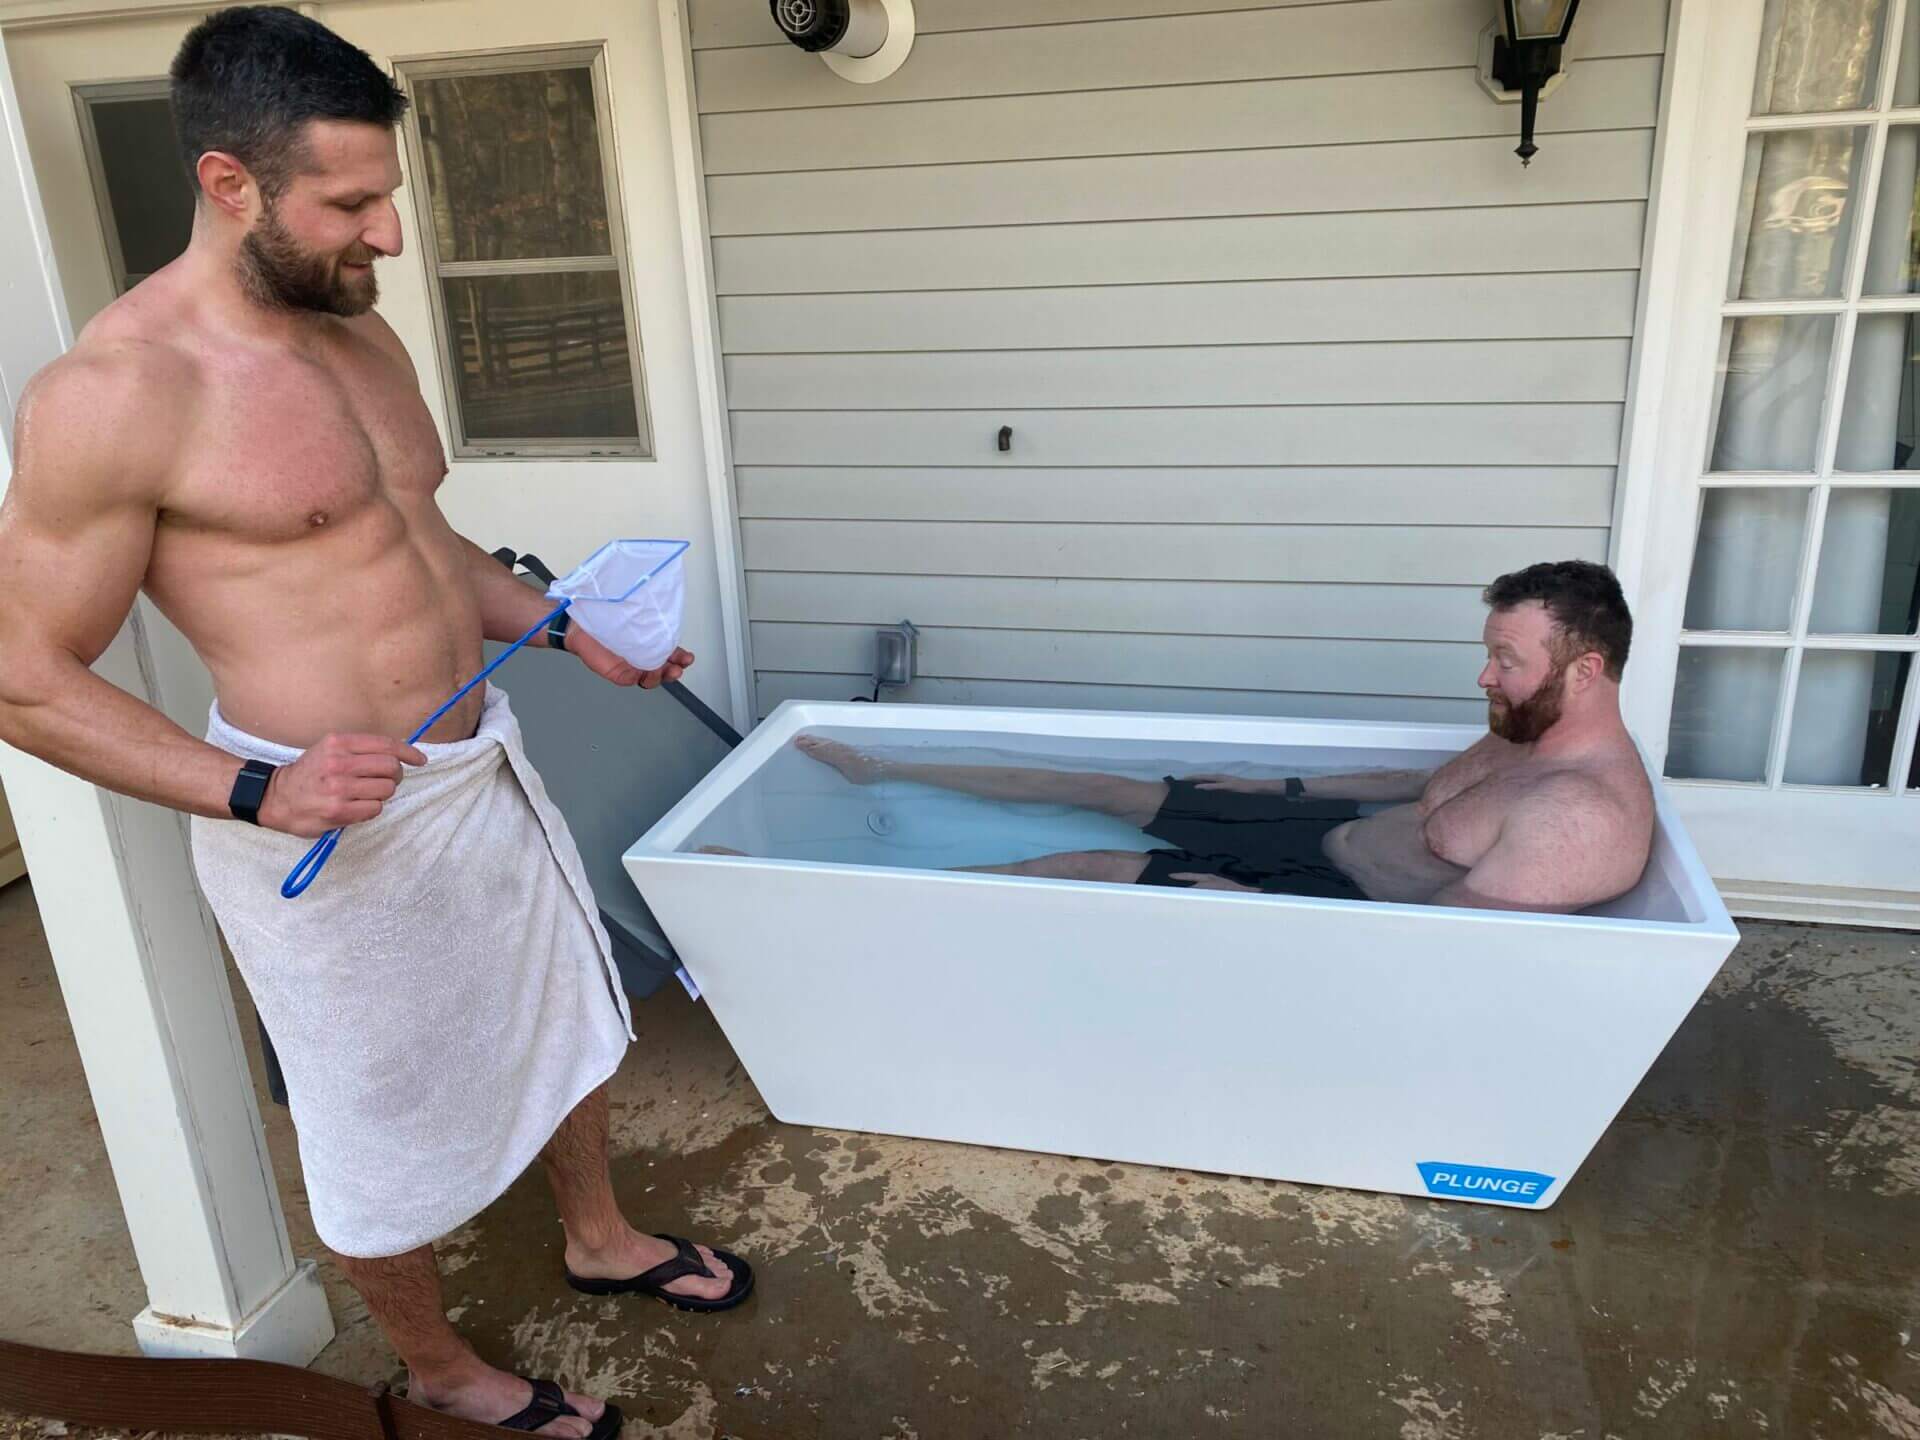 If you're over six feet (like my buddy Bryan), make sure you get a large enough tub so you can immerse yourself fully.